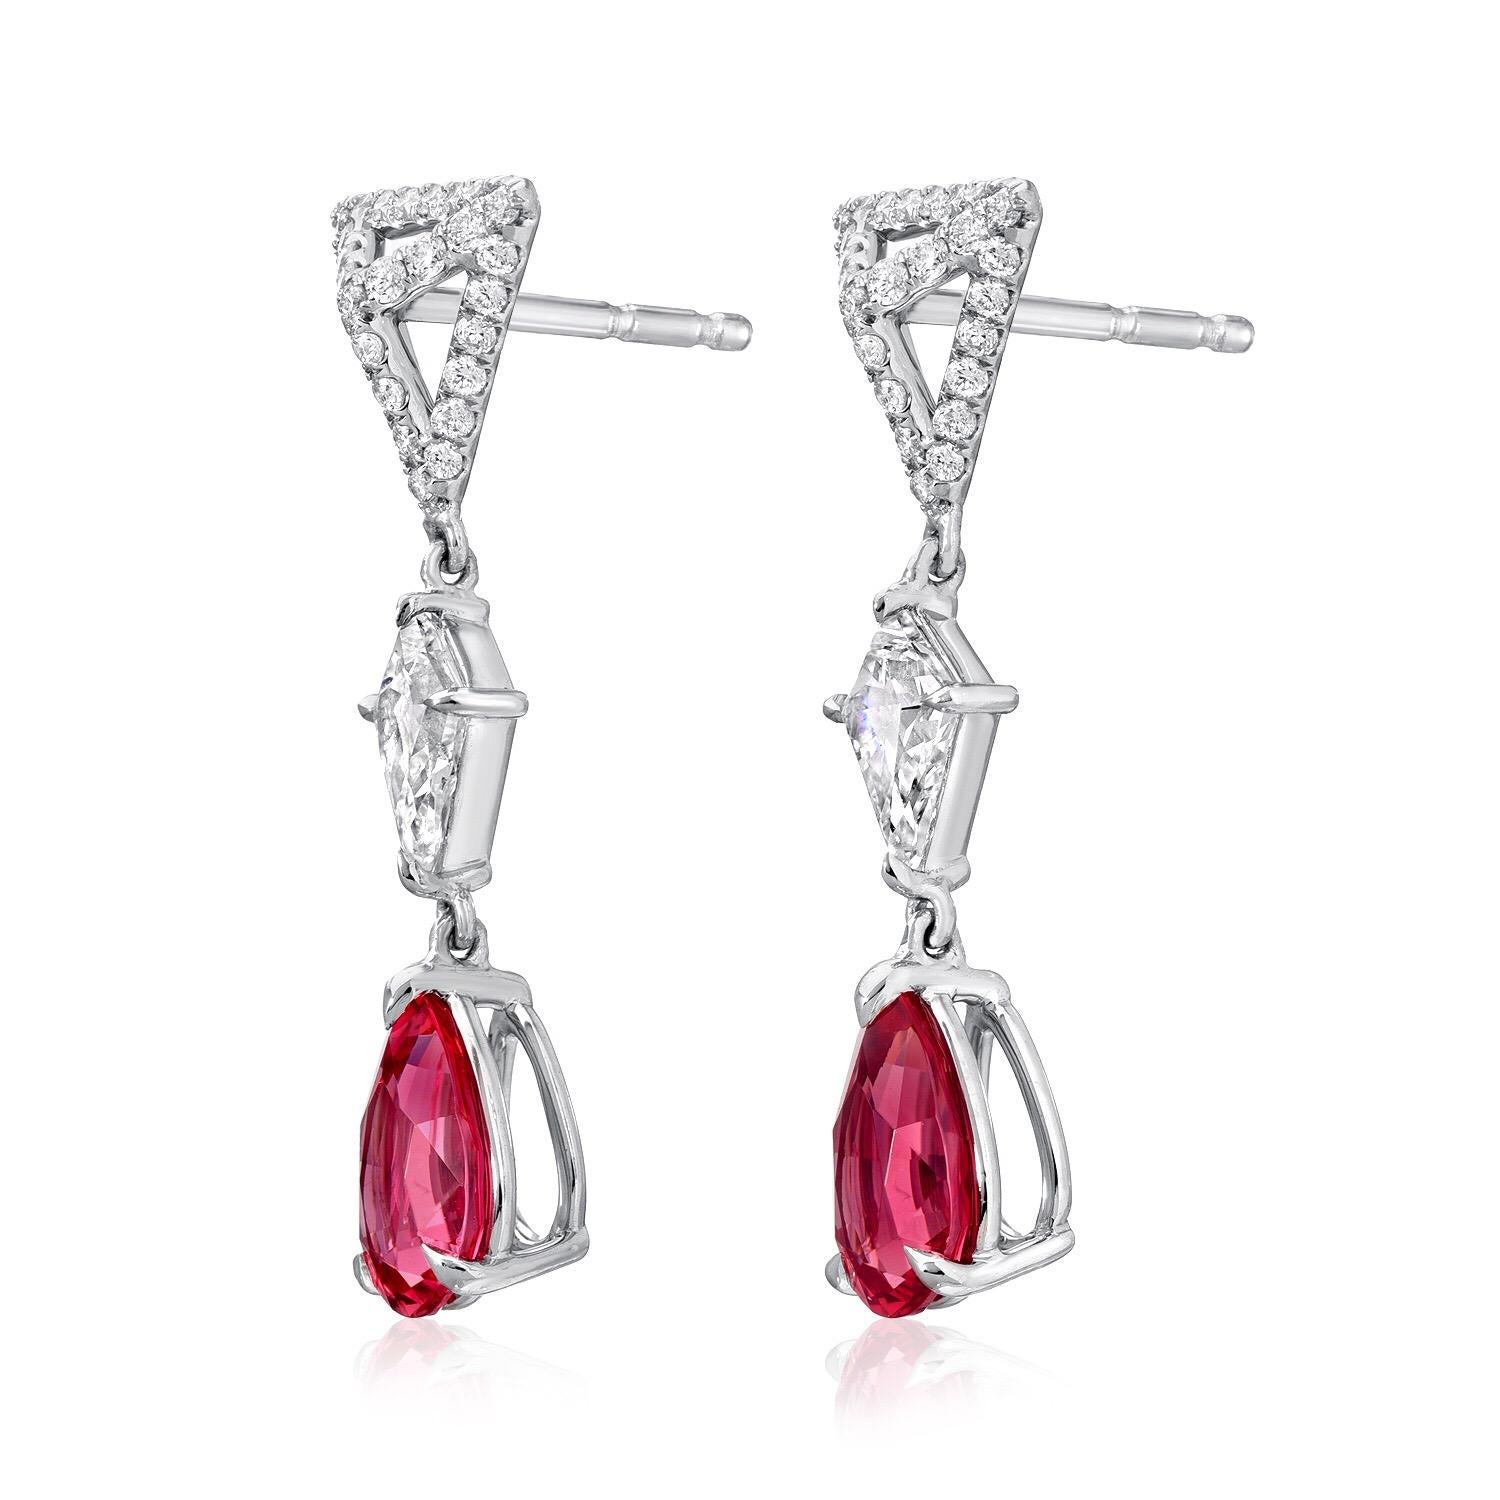 Hot Pink Spinel pear shapes, weighing a total of 1.83 carats, suspending from our signature three dimensional, eight millimeter triangle studs, set with a total of 0.30 round brilliant diamonds, and a pair of kite shaped diamonds weighing a total of